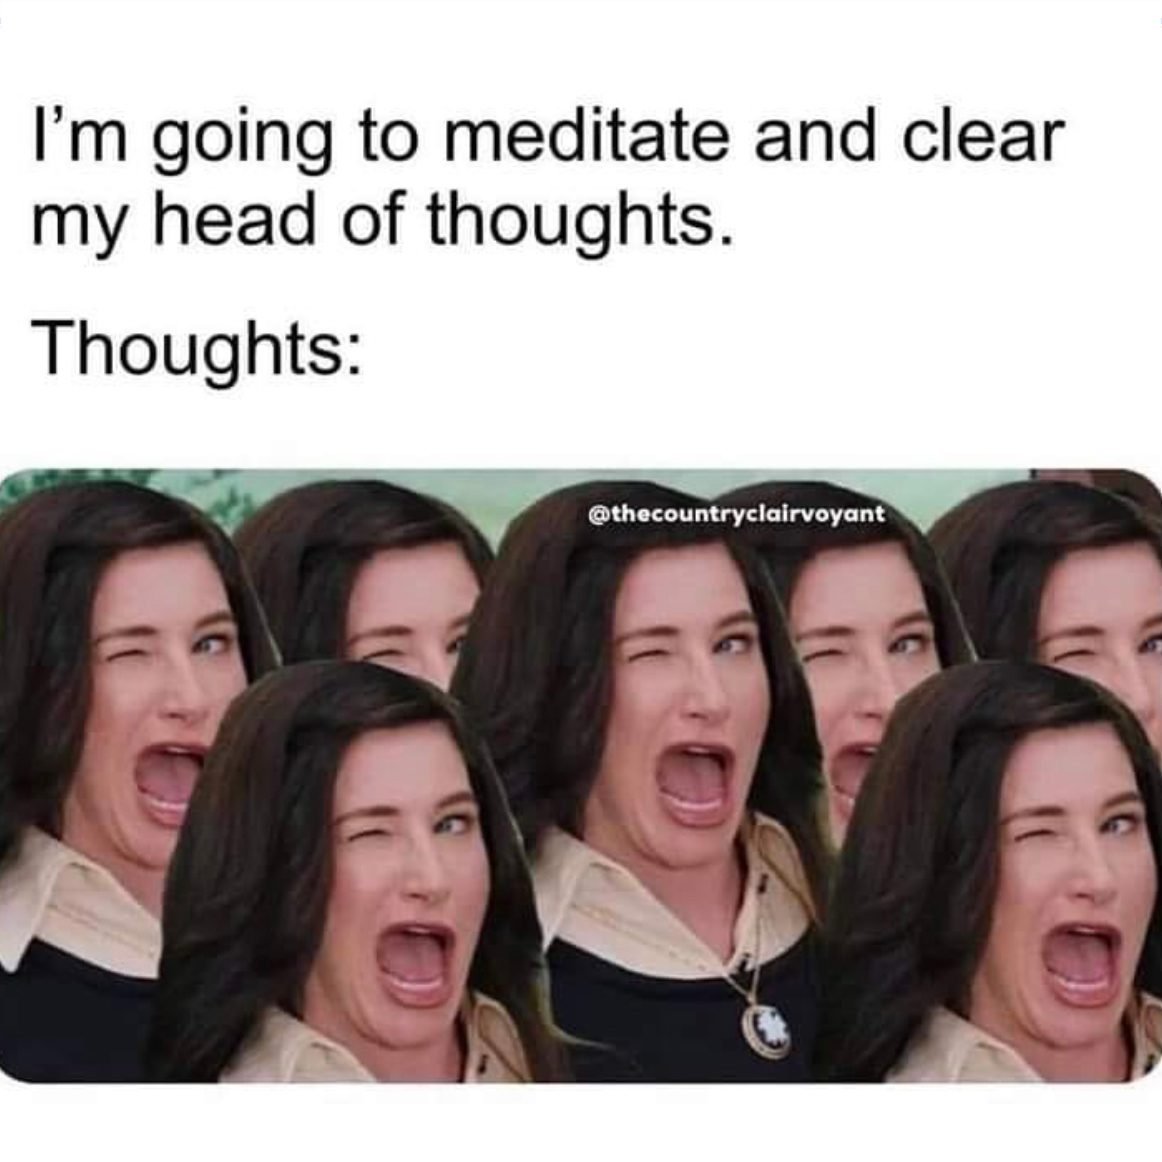 15 Funny Meditation Memes That Will Make You Laugh | The Healthy